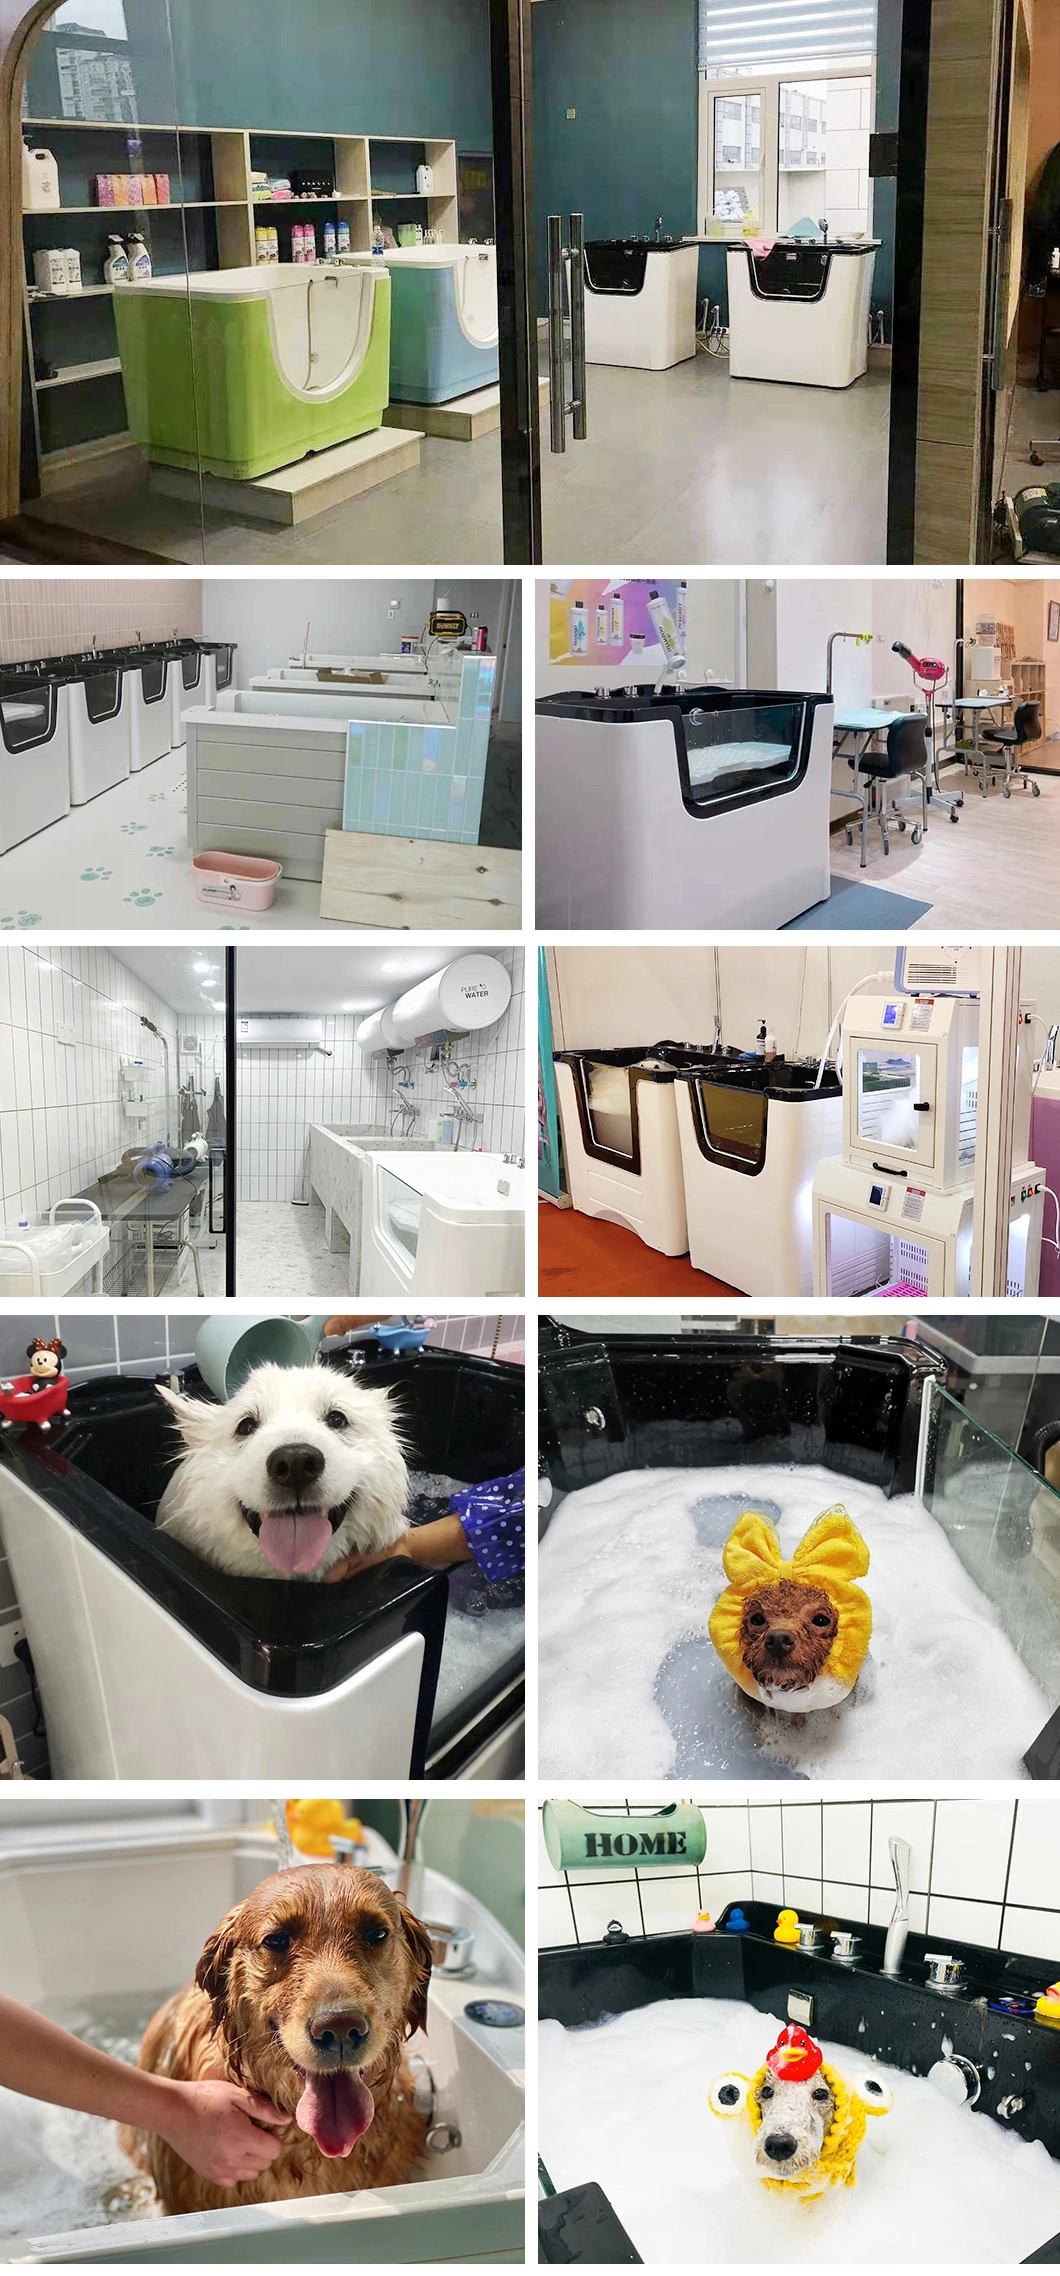 Animal Grooming Pet Cleaning Equipment Clinic/Home Use Pet Bubble SPA Dog/Cat Wash Shower Pet Bathtub